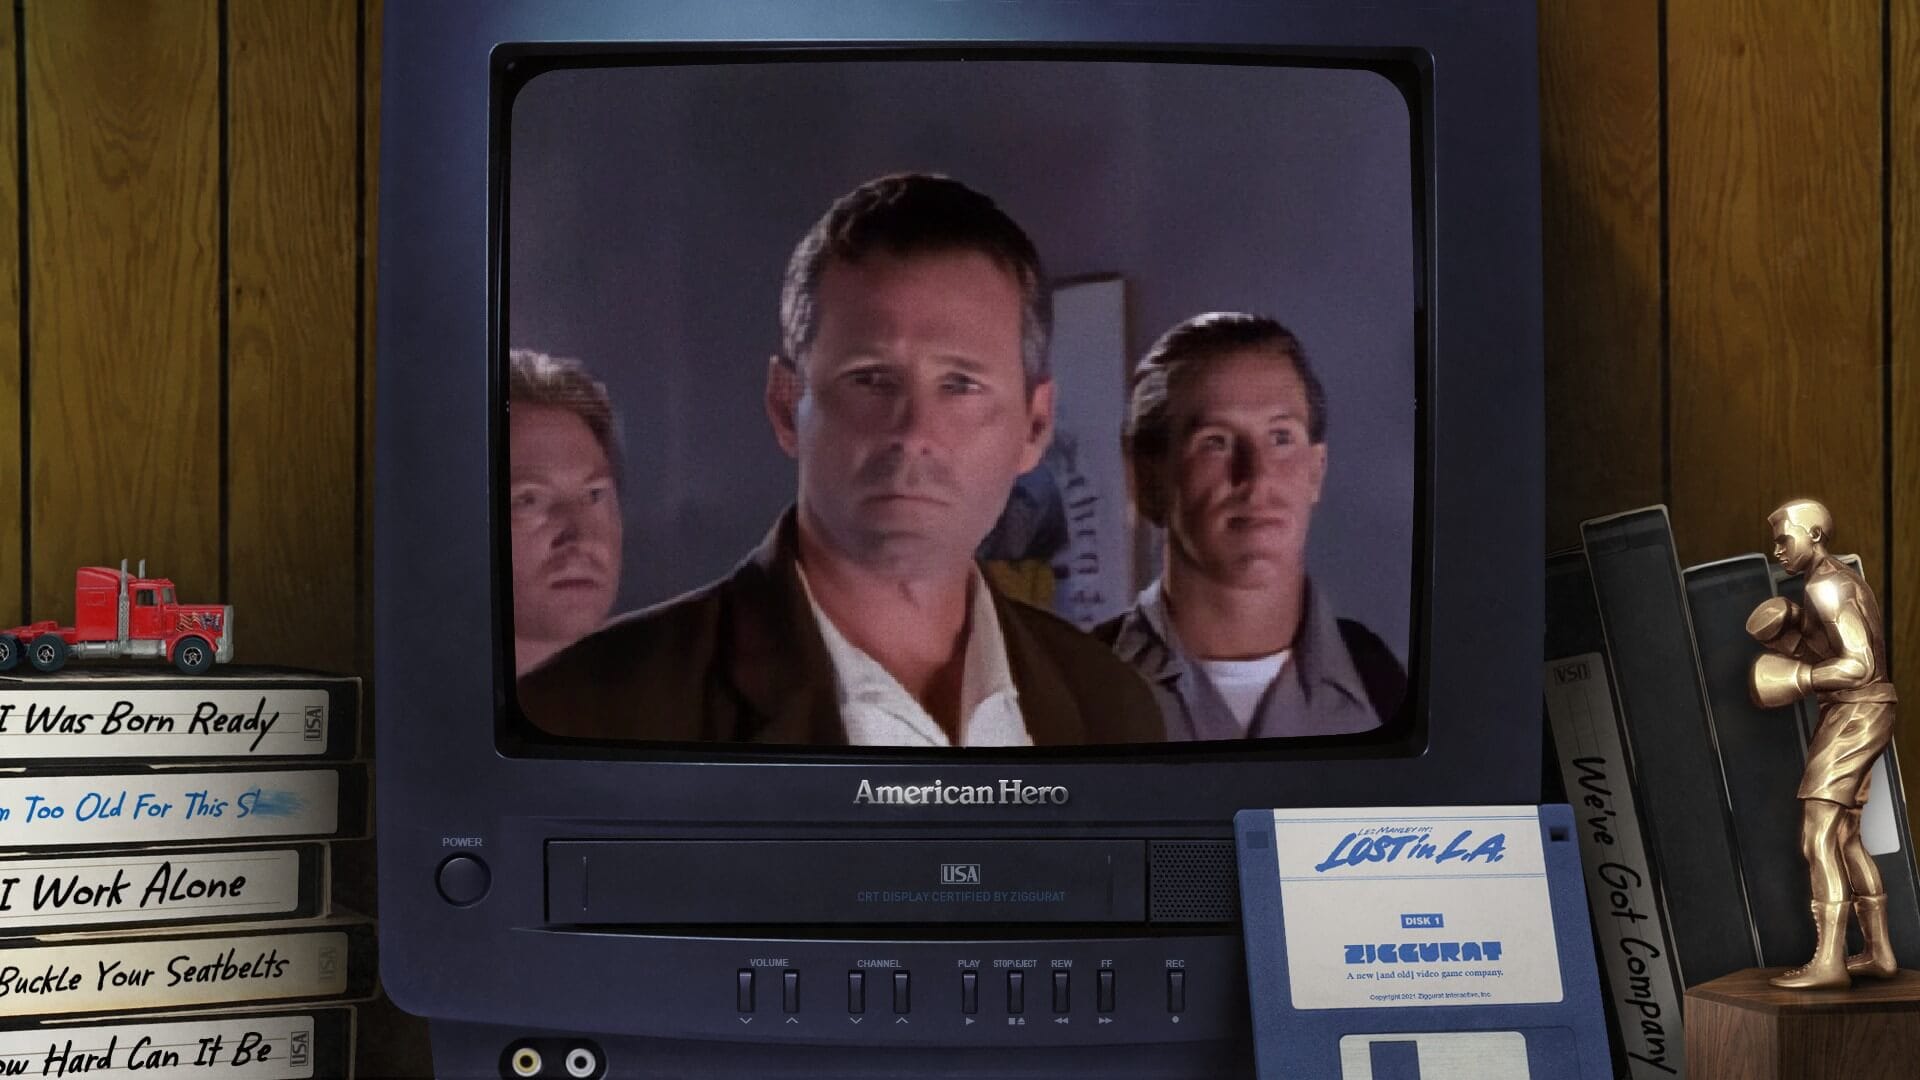 A shot of the newly restored lost 90s FMV game American Hero